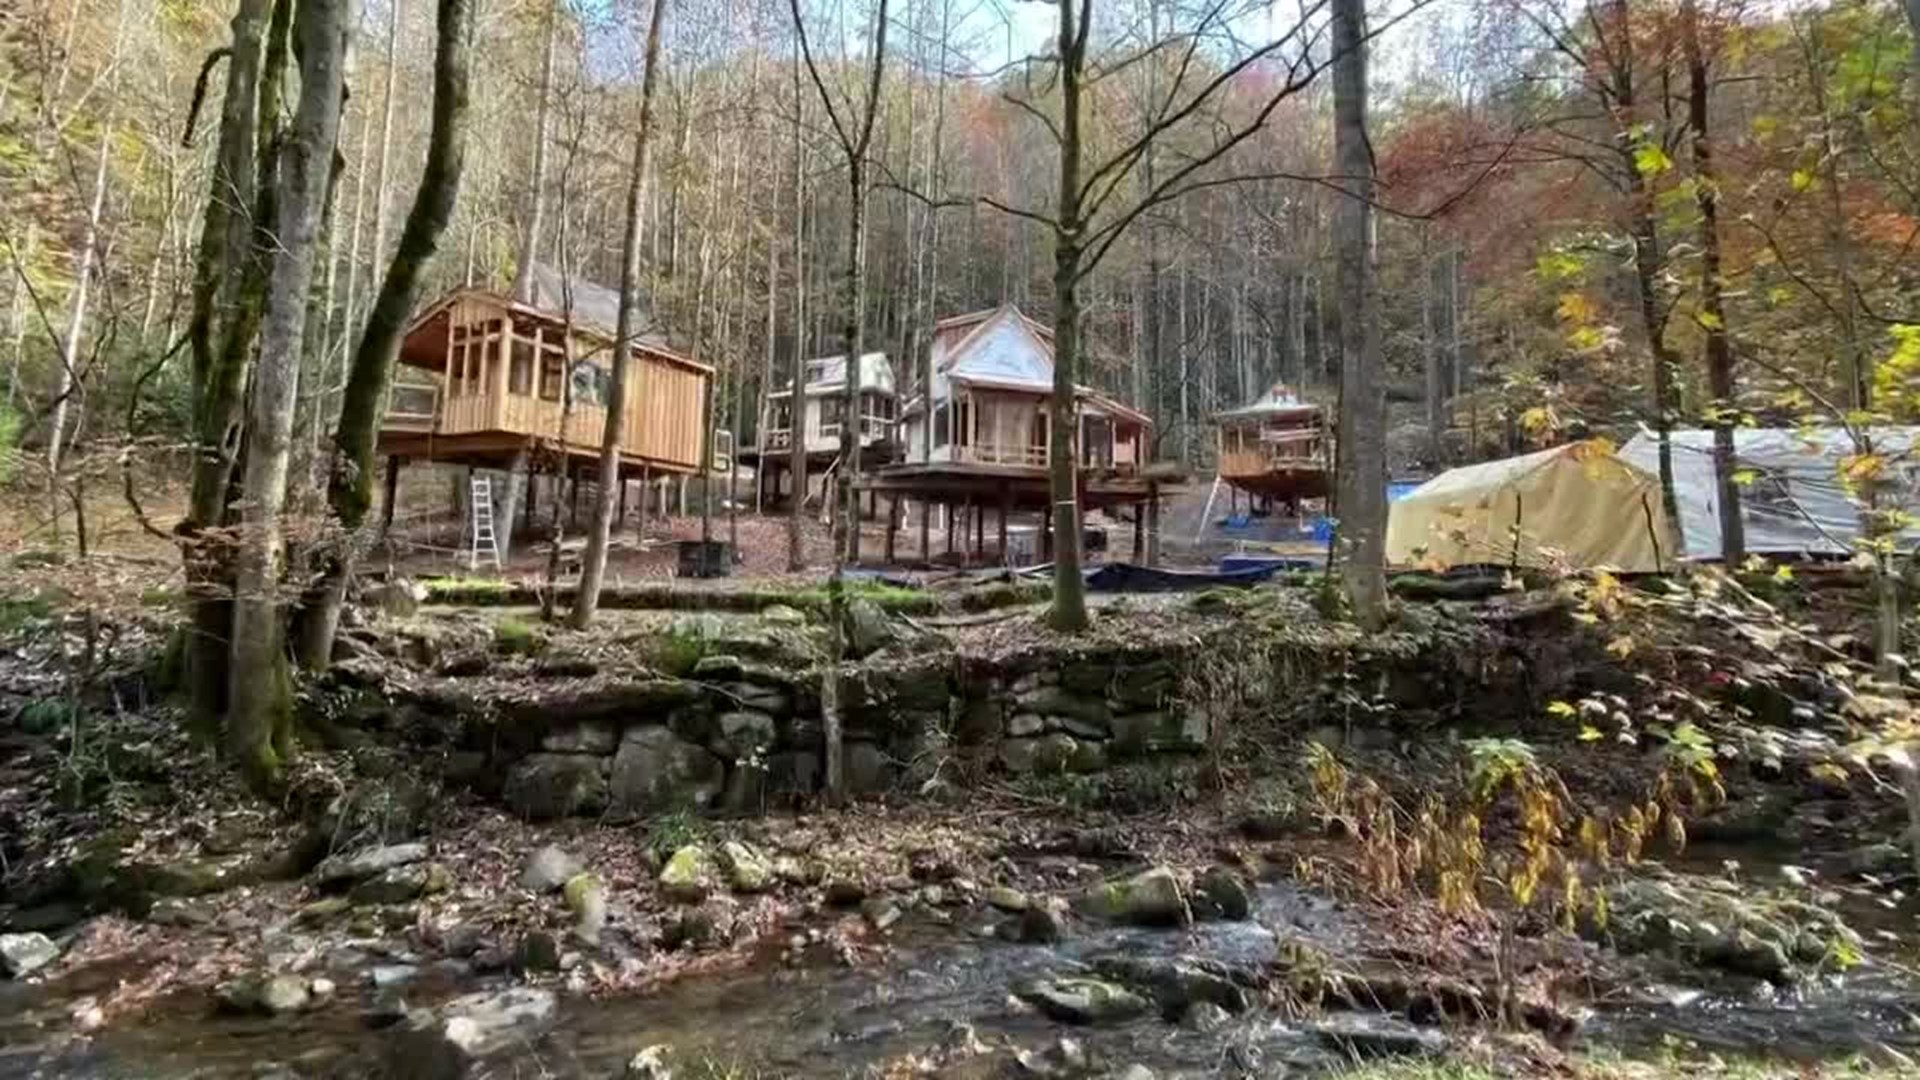 Treehouse getaways coming to the Smokies in Spring 2020 - Courtesy WBIR